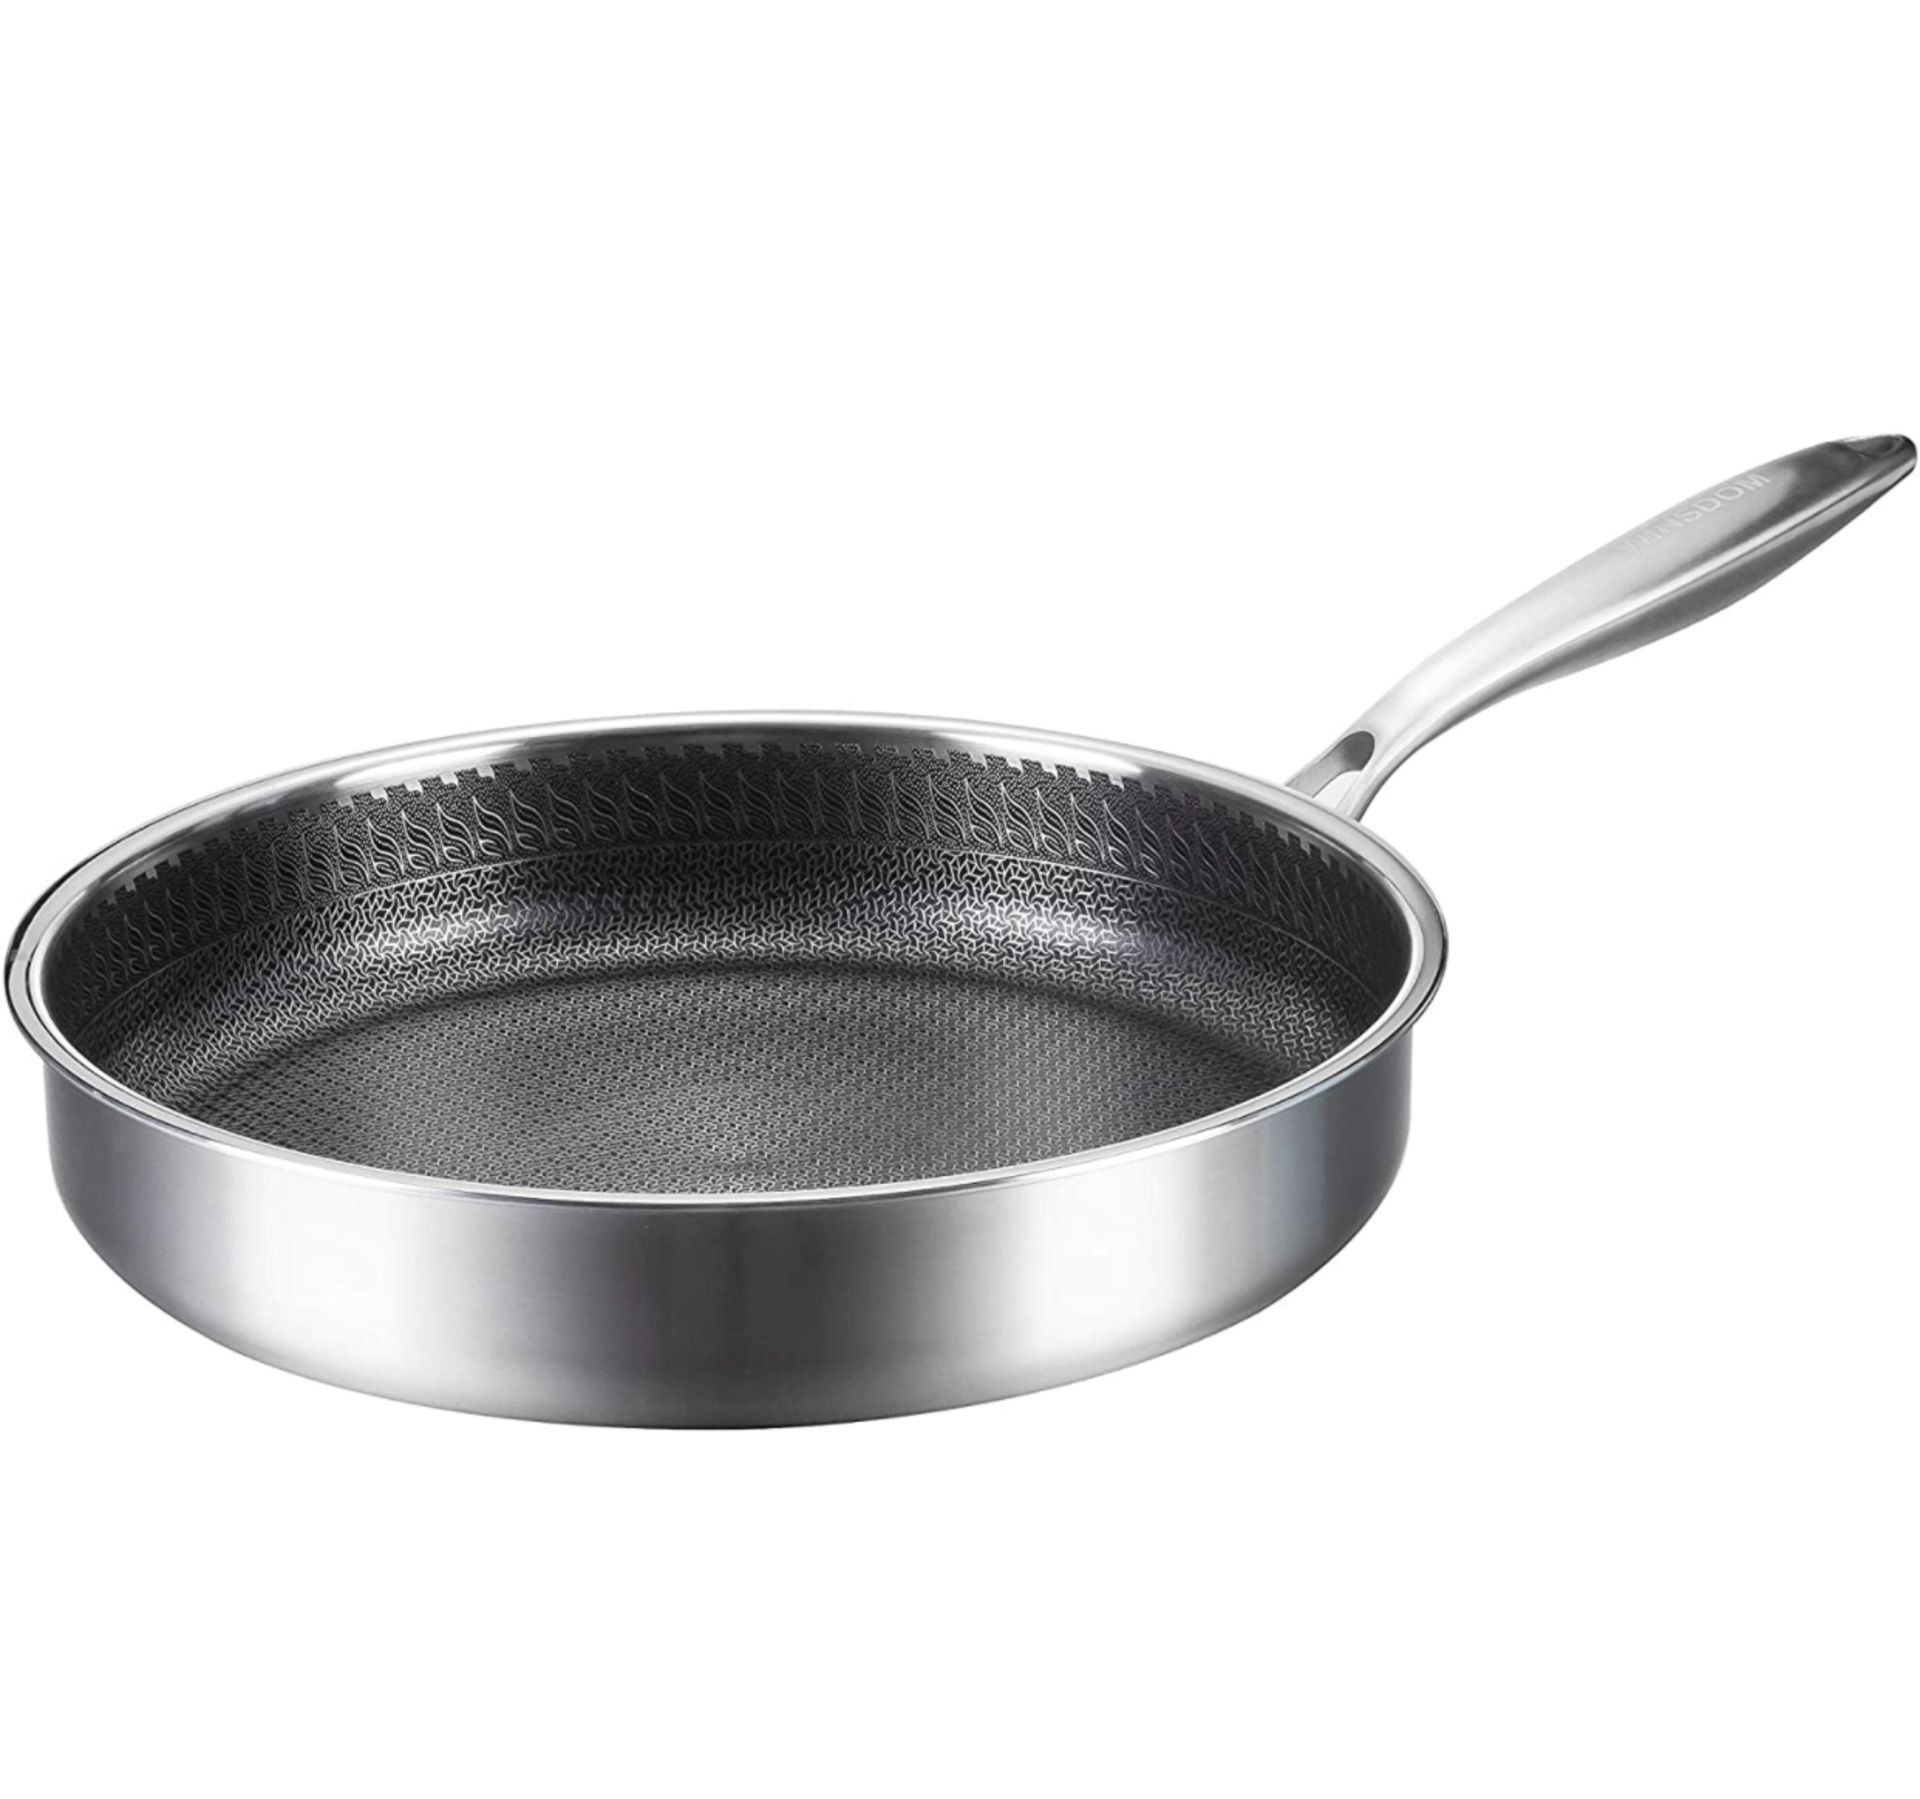 Winsdon Stainless Steel Large Induction Deep Frying Pan RRP £39.99